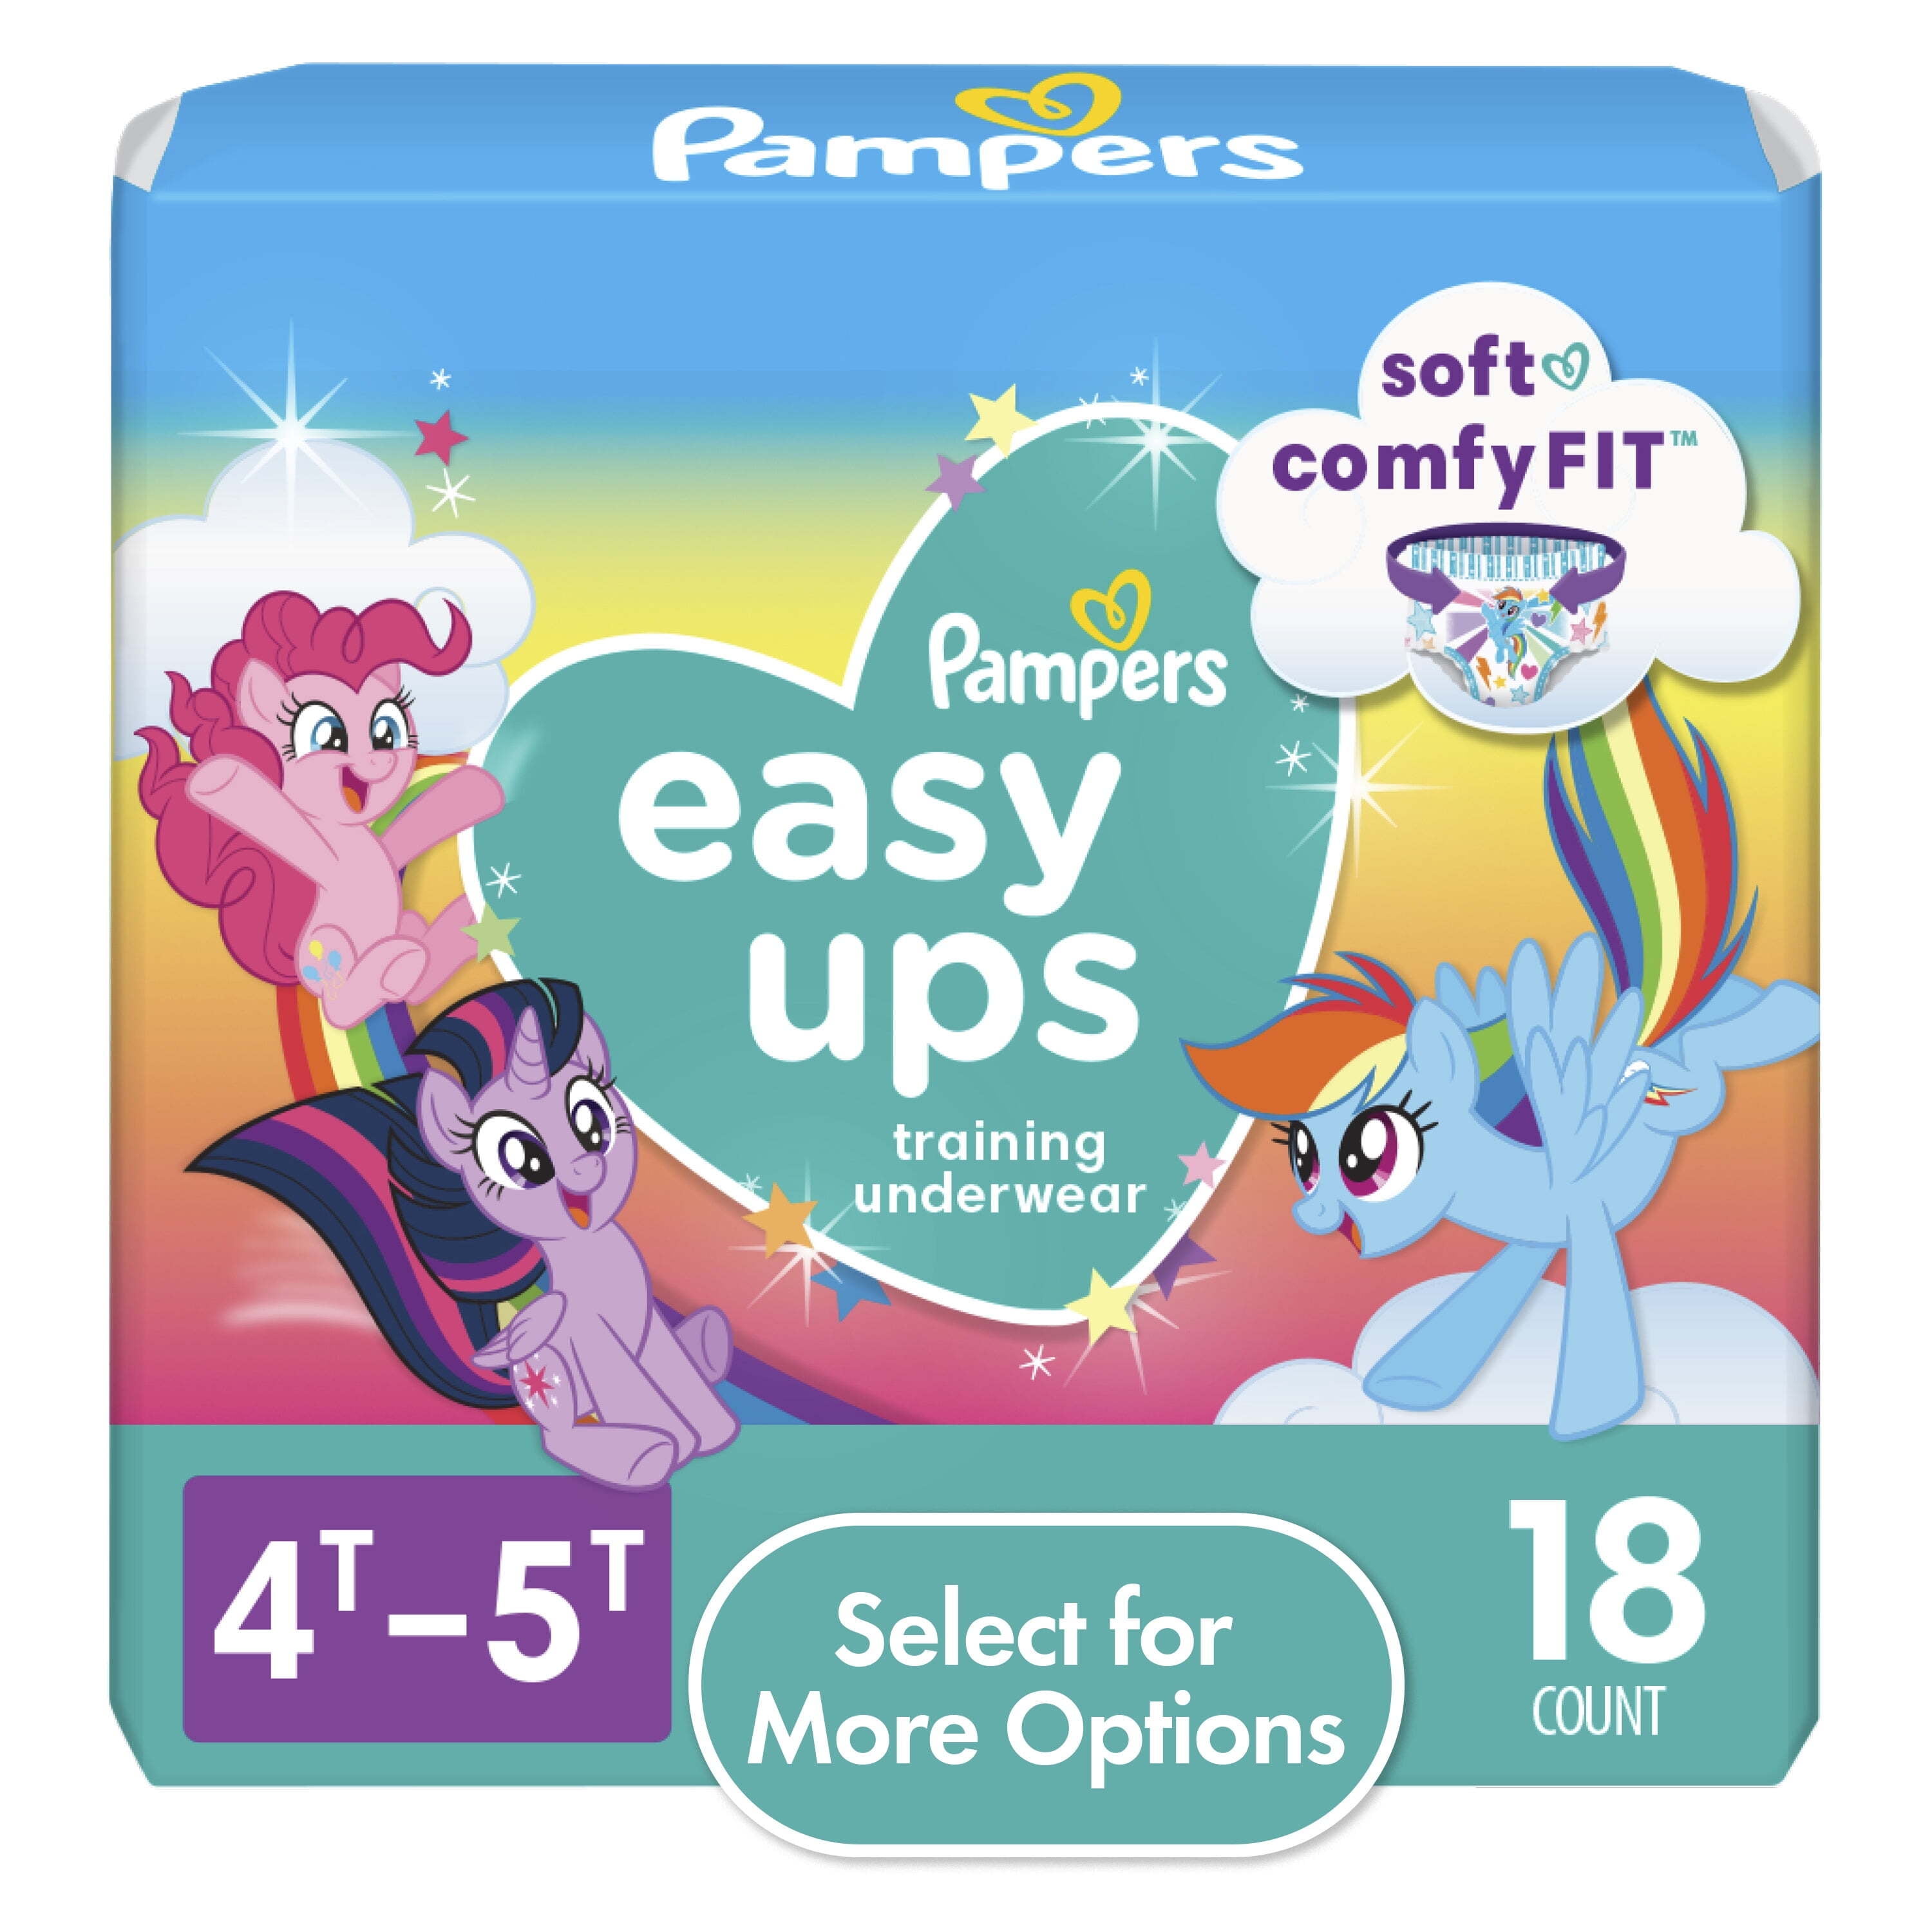 Pampers Easy Ups My Little Pony Training Pants Toddler Girls Size 6 4T-5T  18 Count (Select for More Options) 